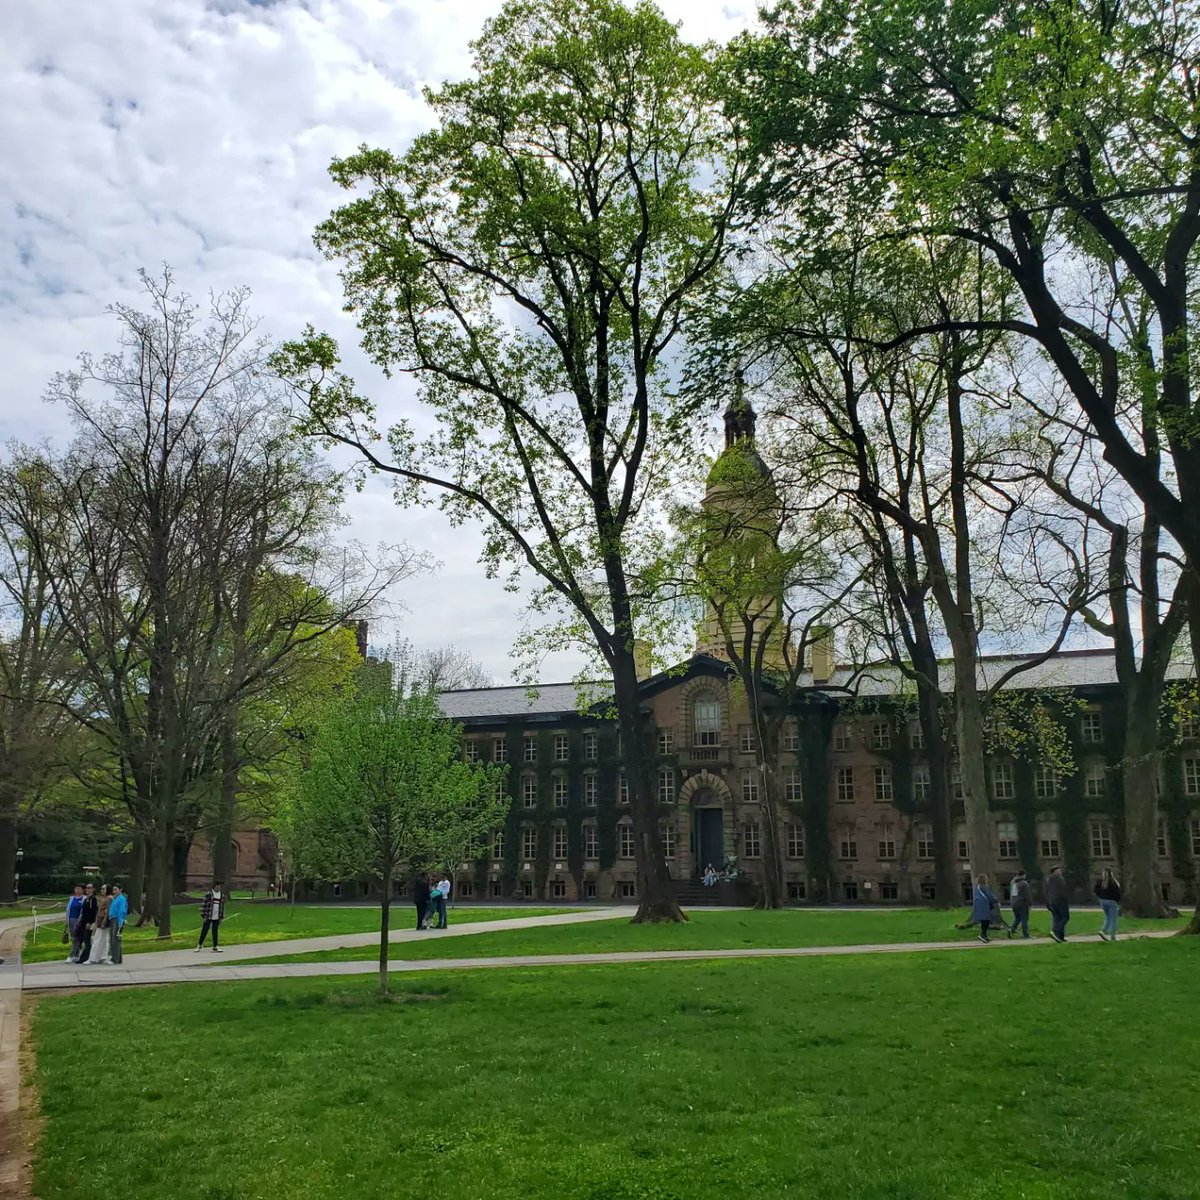 Coming back home from beautiful Princeton after a couple of very productive days as a scholar at the Advanced Research Institute (ARI) workshop. Lots of good things to come!! #science #grants #Princeton